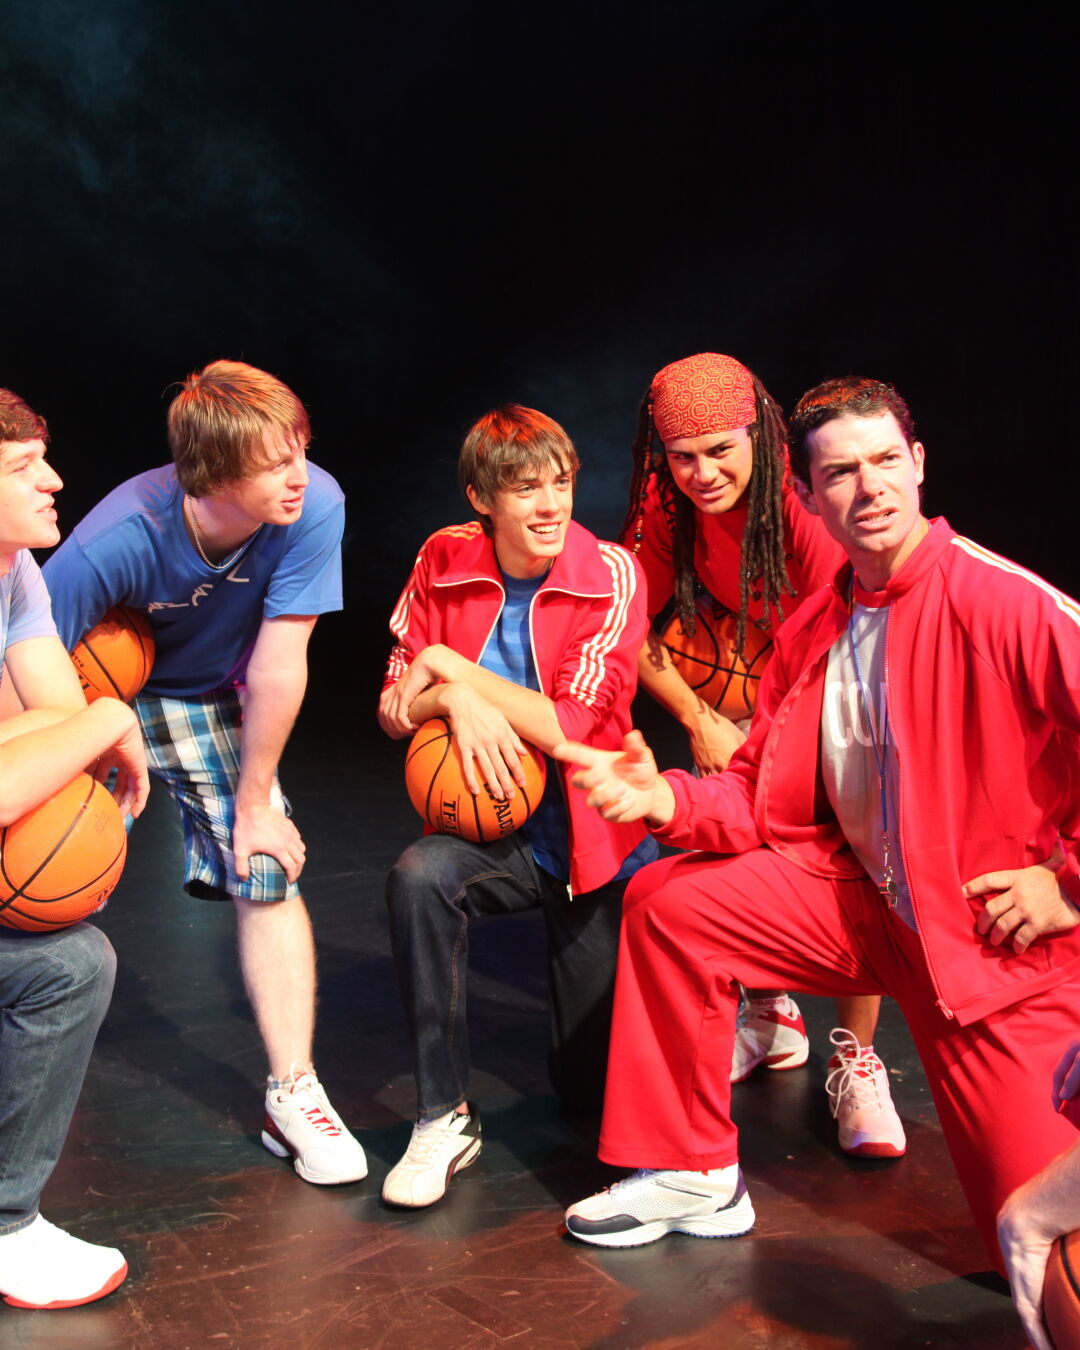 Performers acting out Basketball huddle during performance.